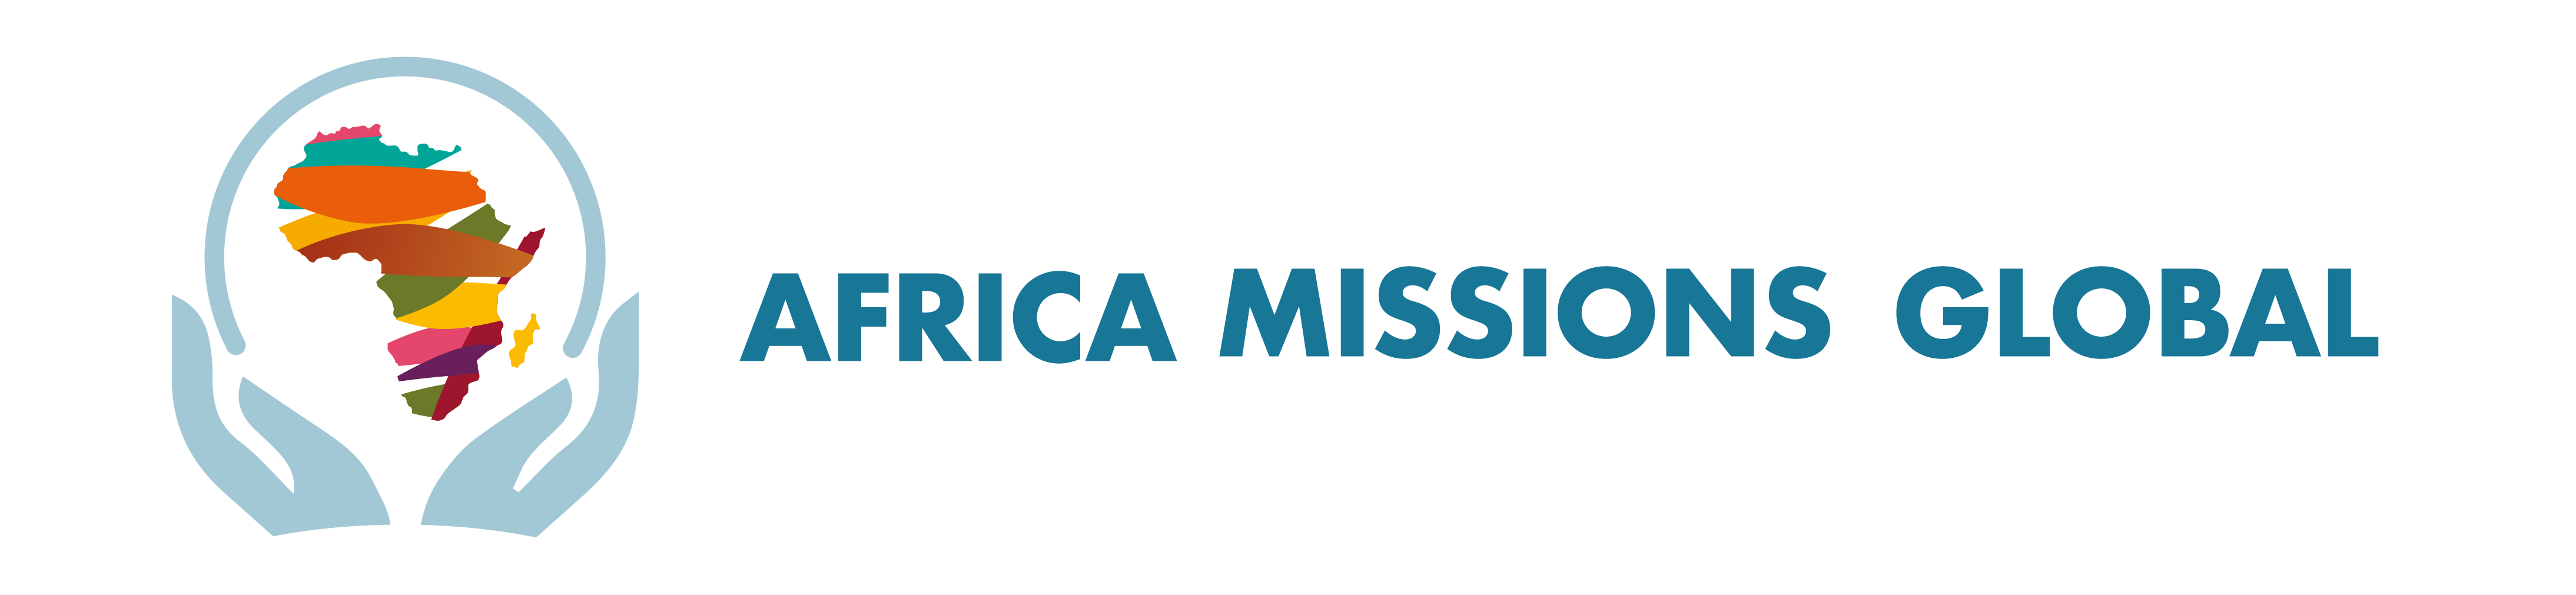 Africa Missions Global